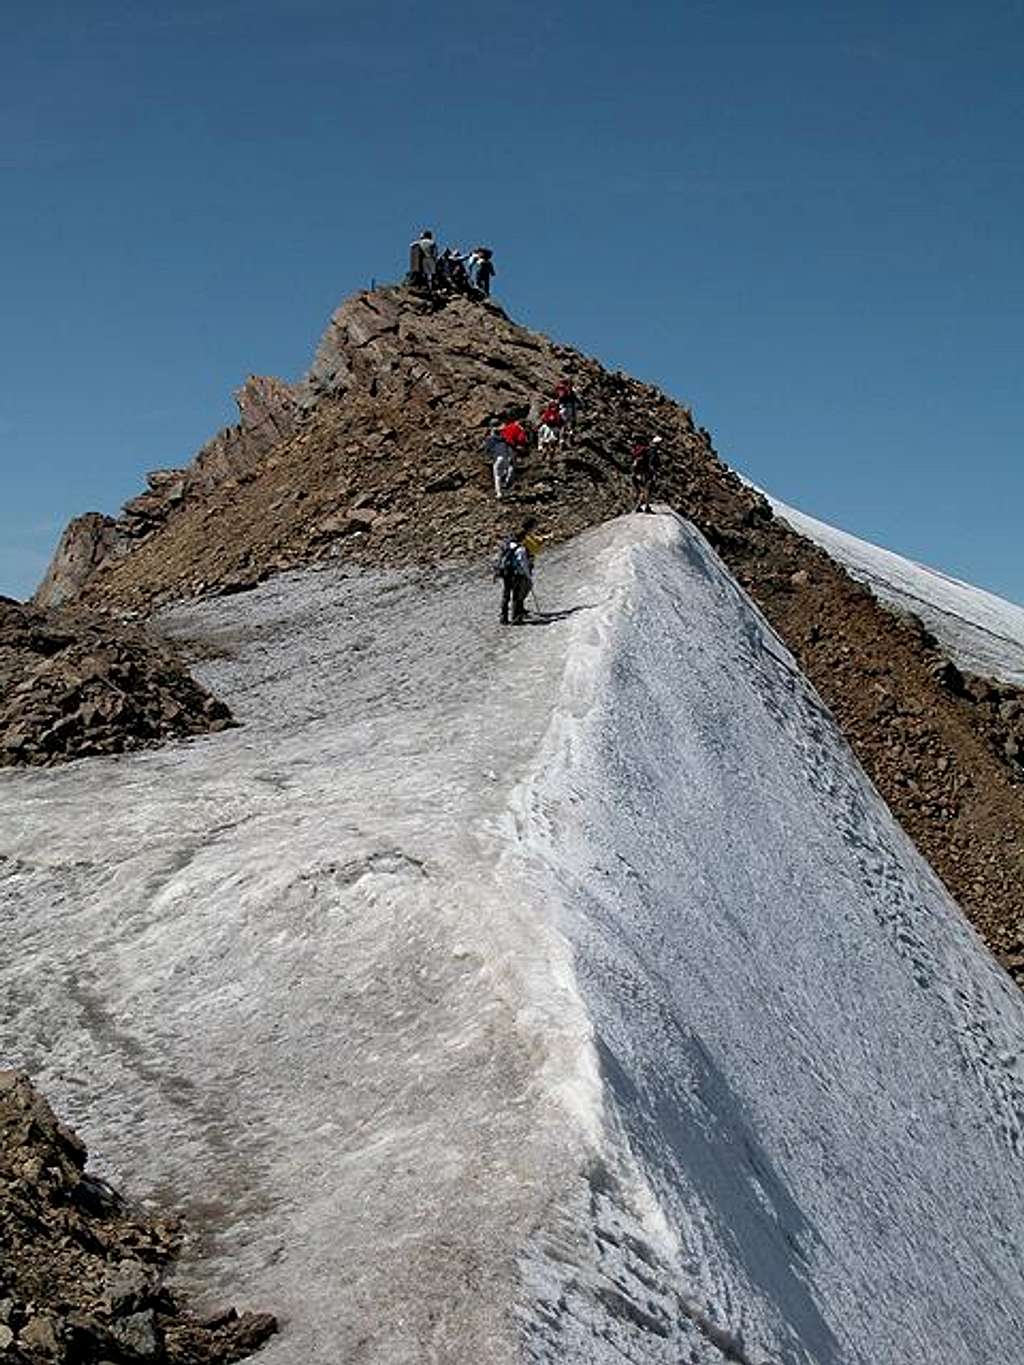 The last steps to the summit...